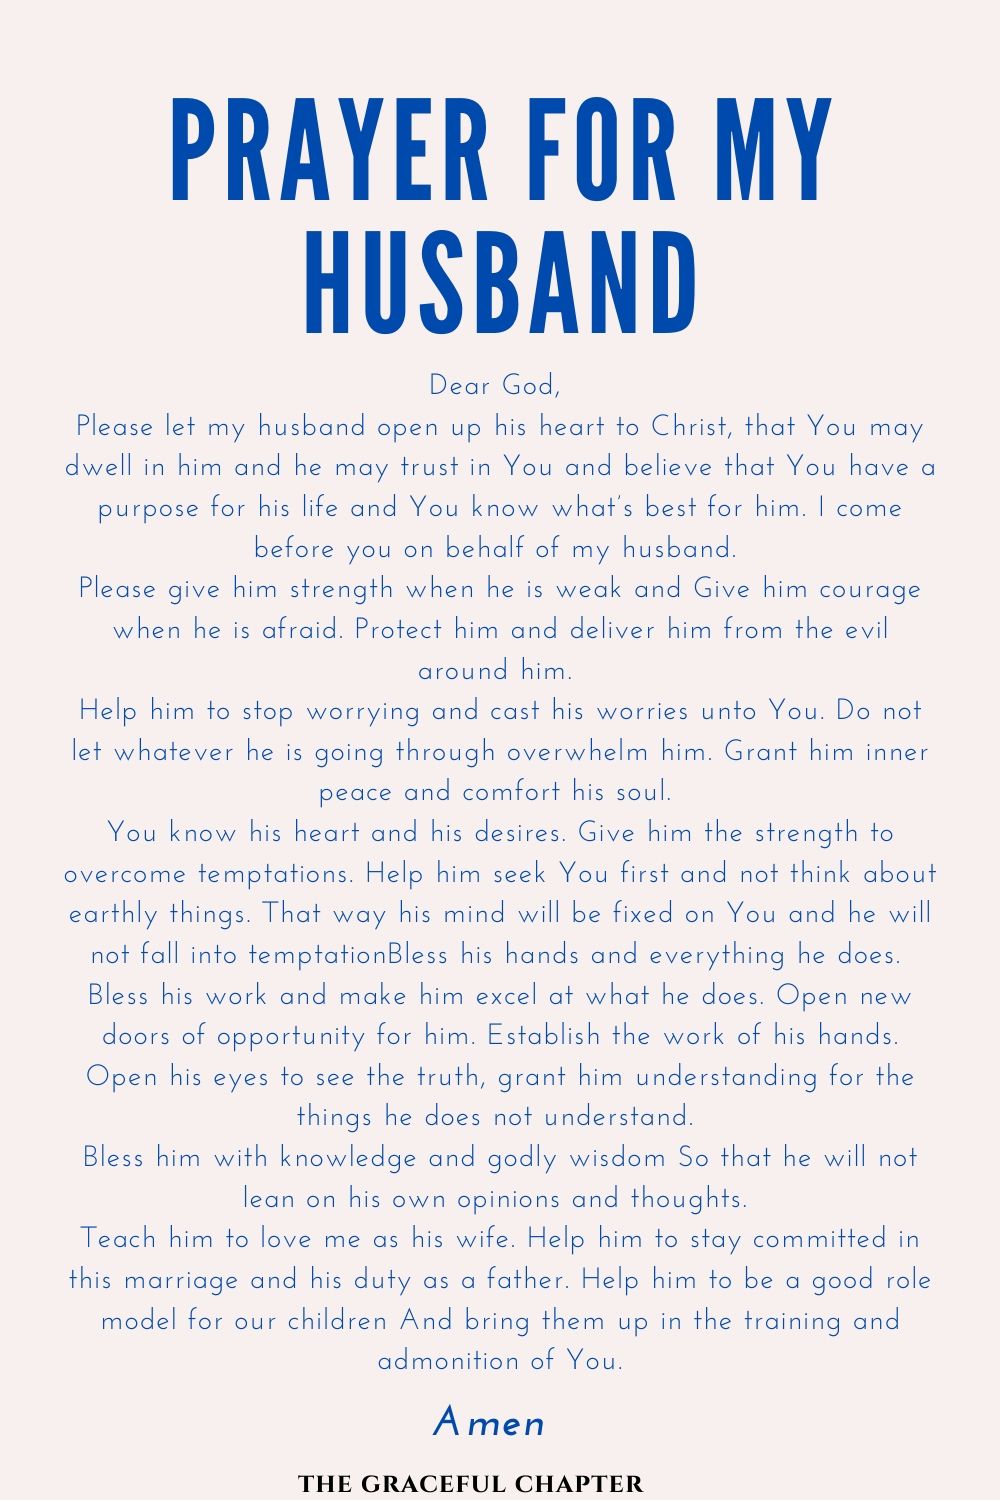 prayer for your husband